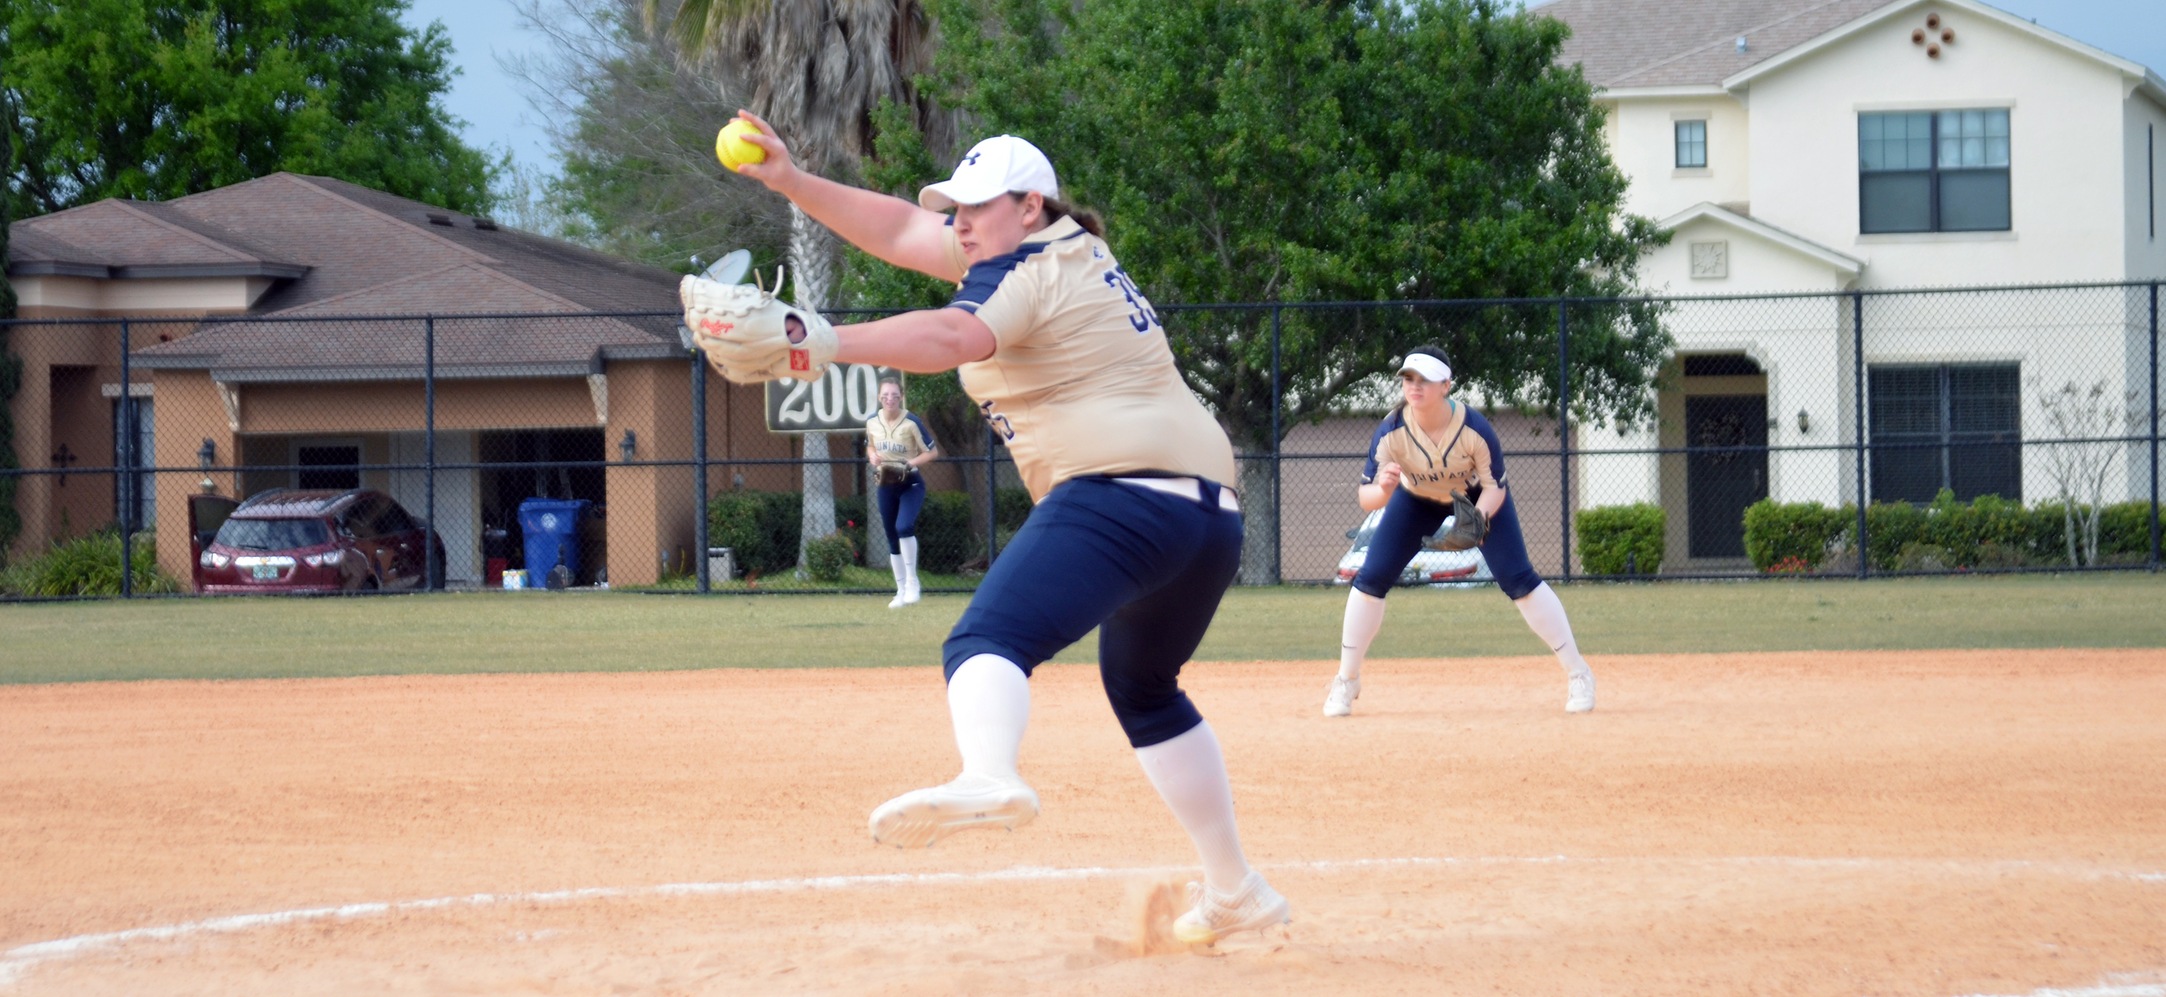 Eagles Notch First Win but Get Overpowered in Final Innings in Game Two